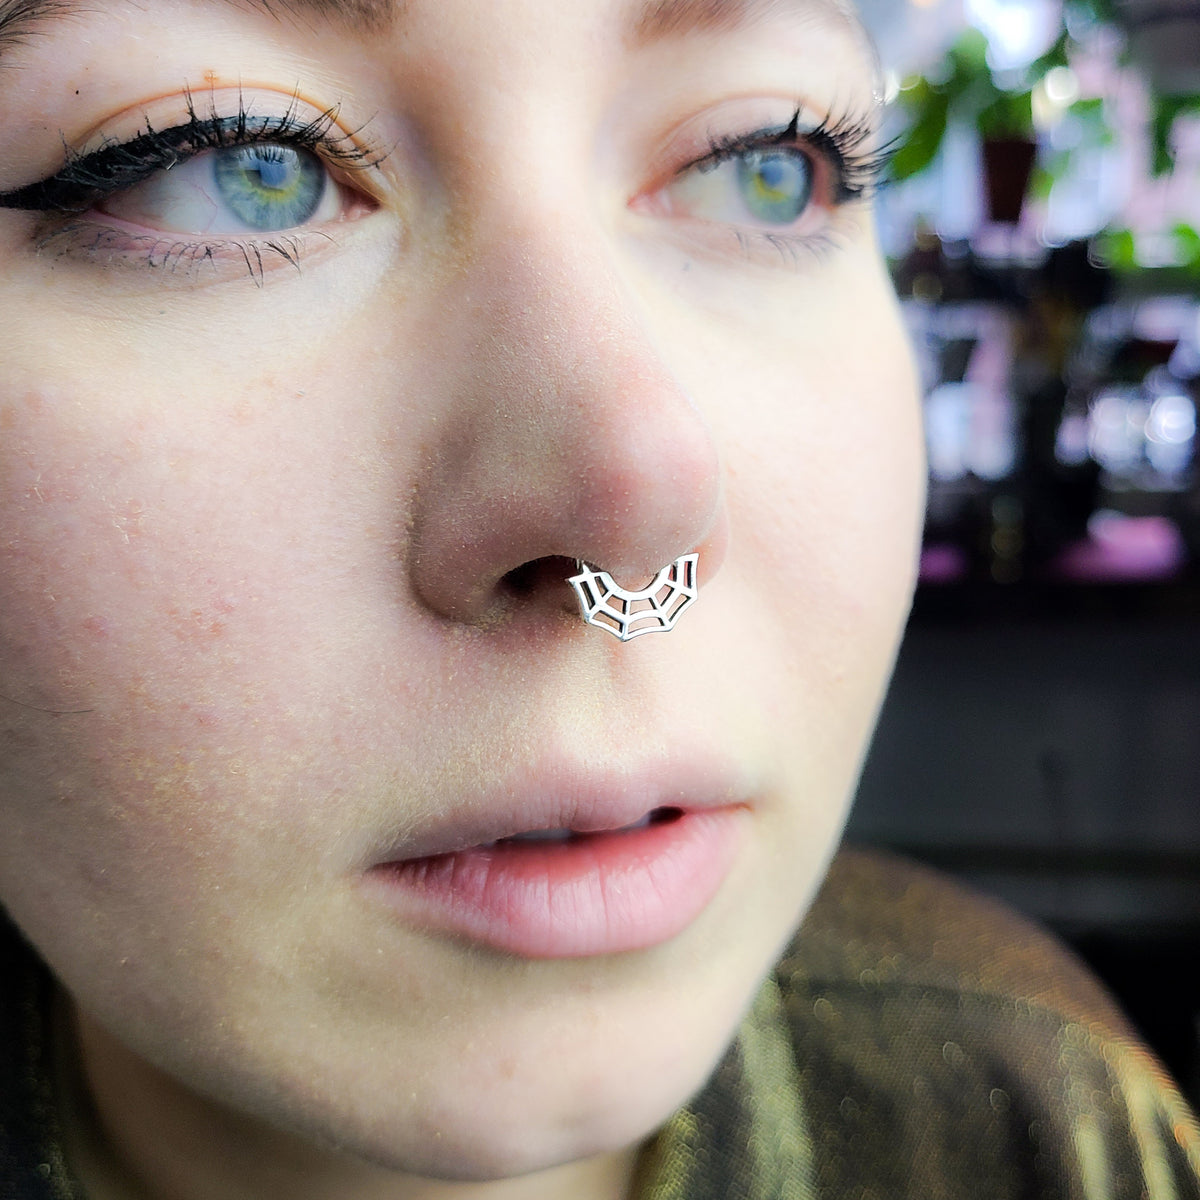 Person wearing a concealed septum retainer